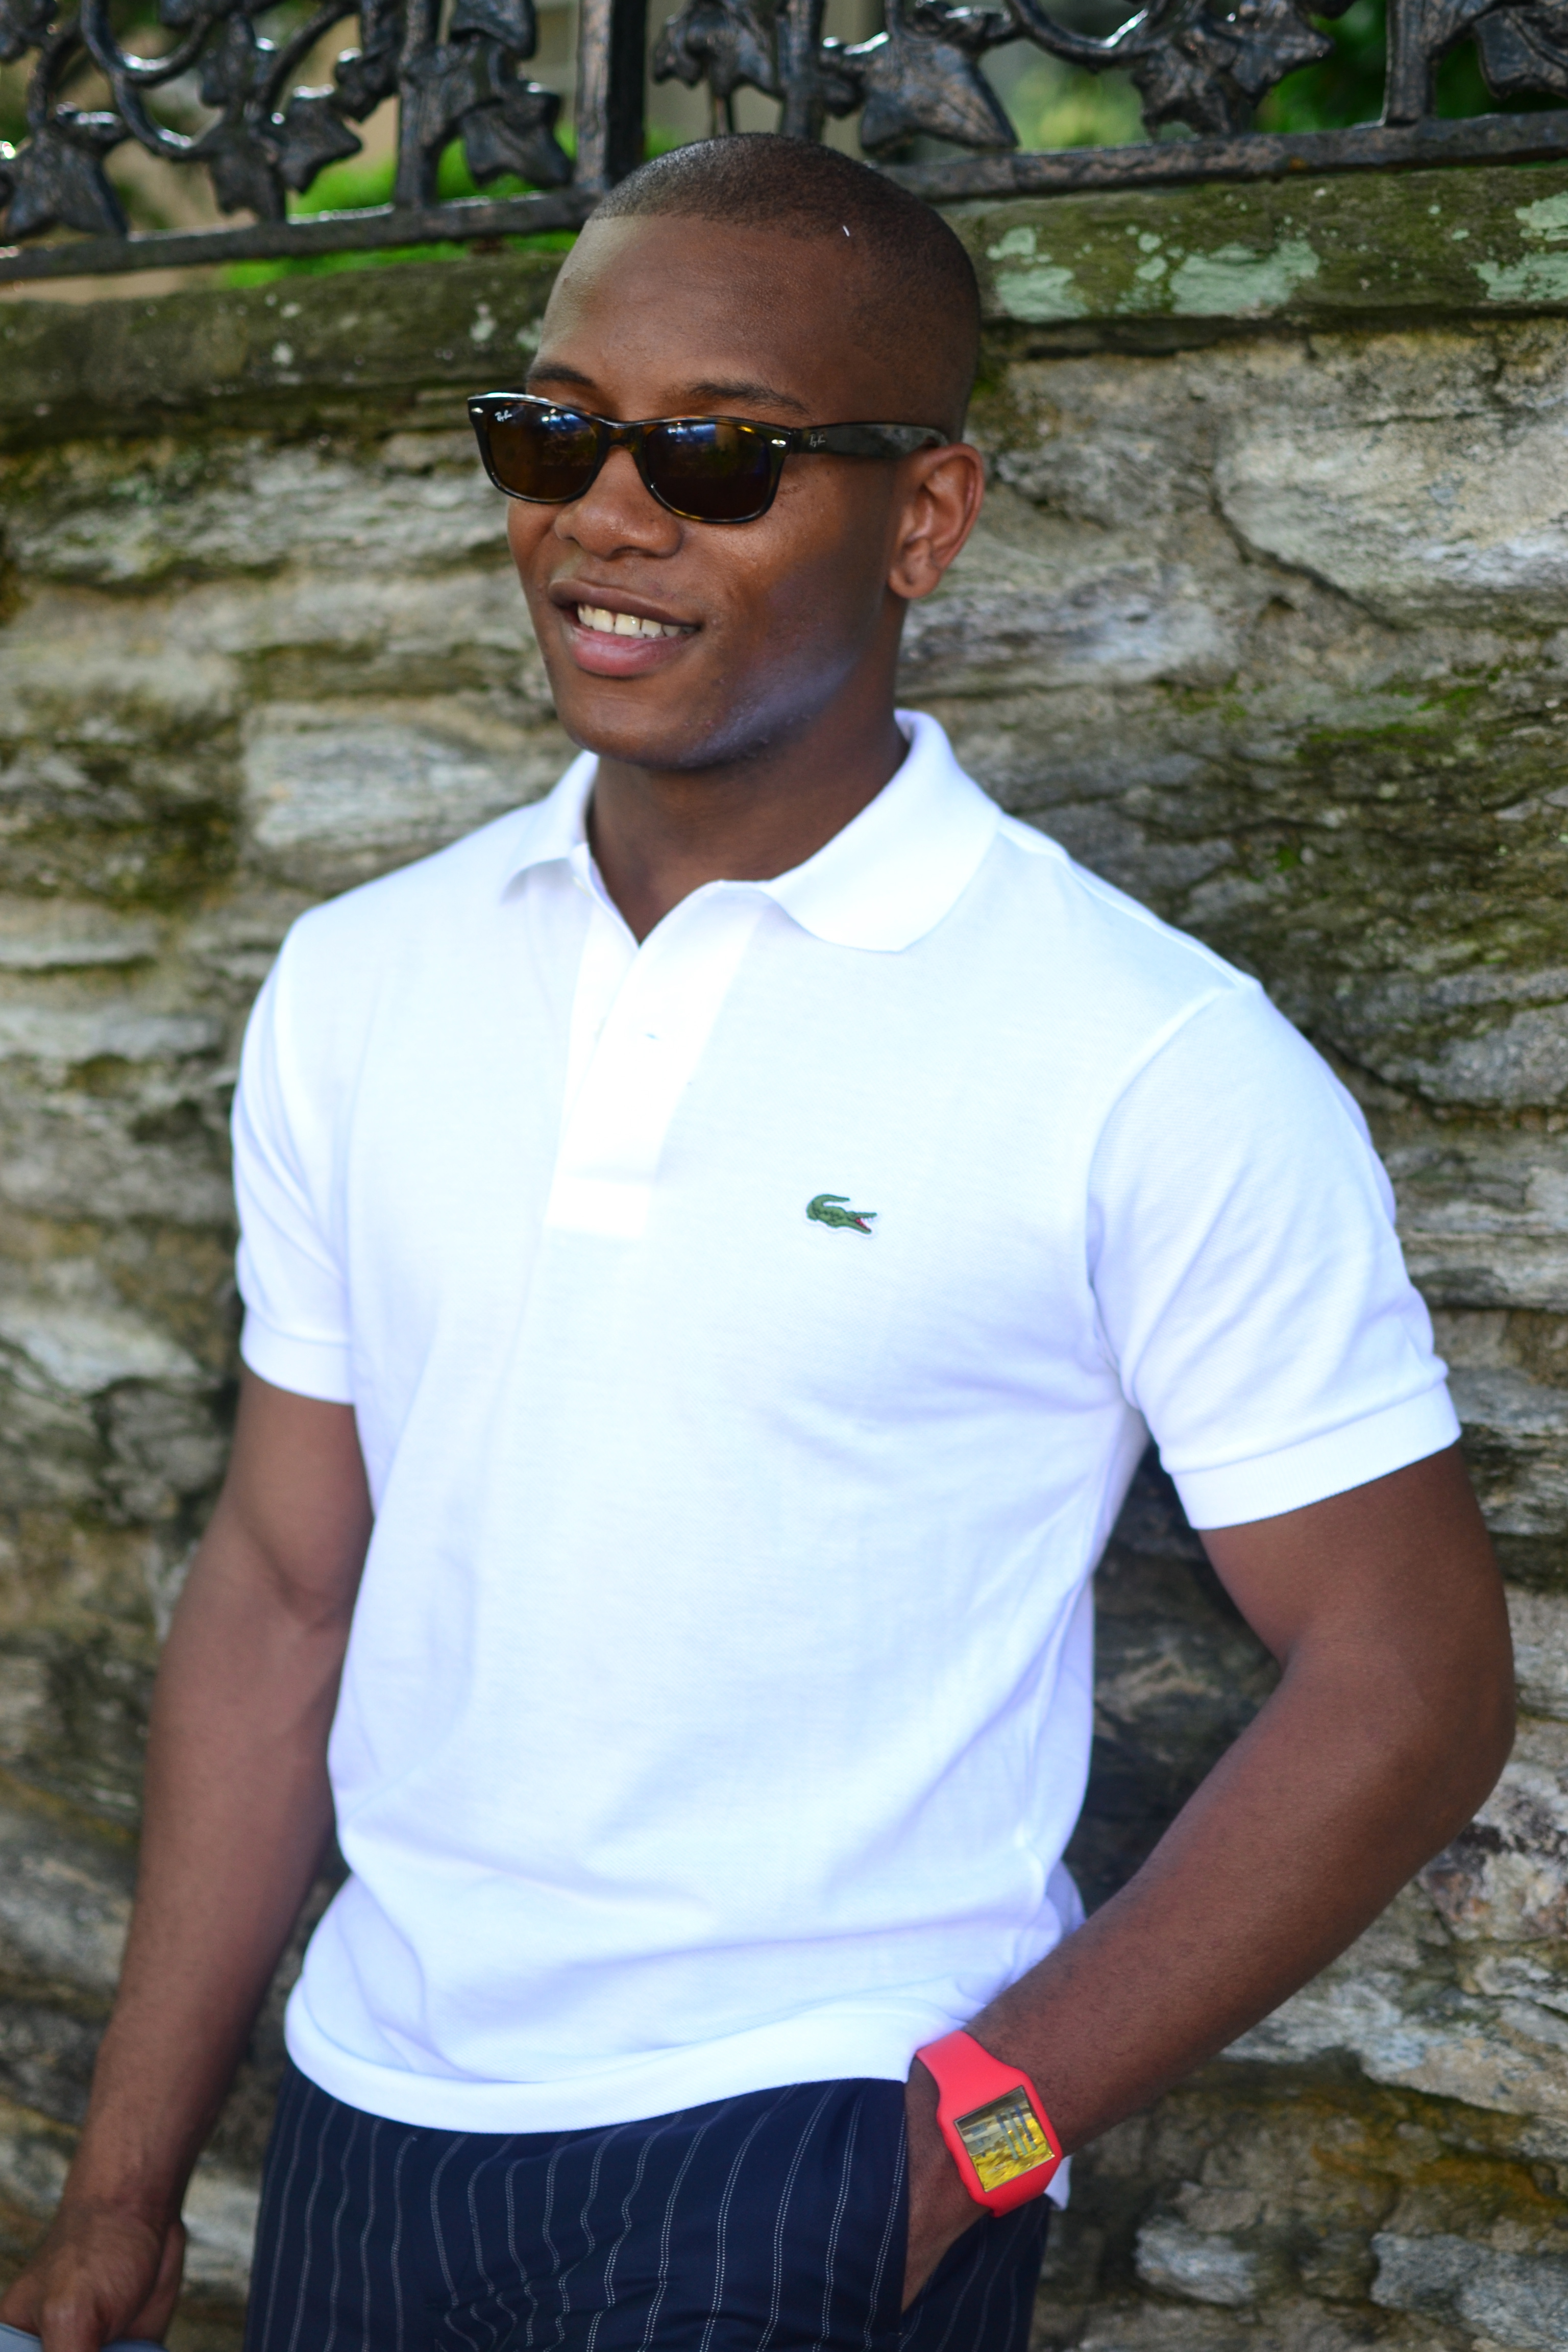 Lacoste 80th Anniversary of the 12.12.1 Polo Shirt via Men's Style Pro